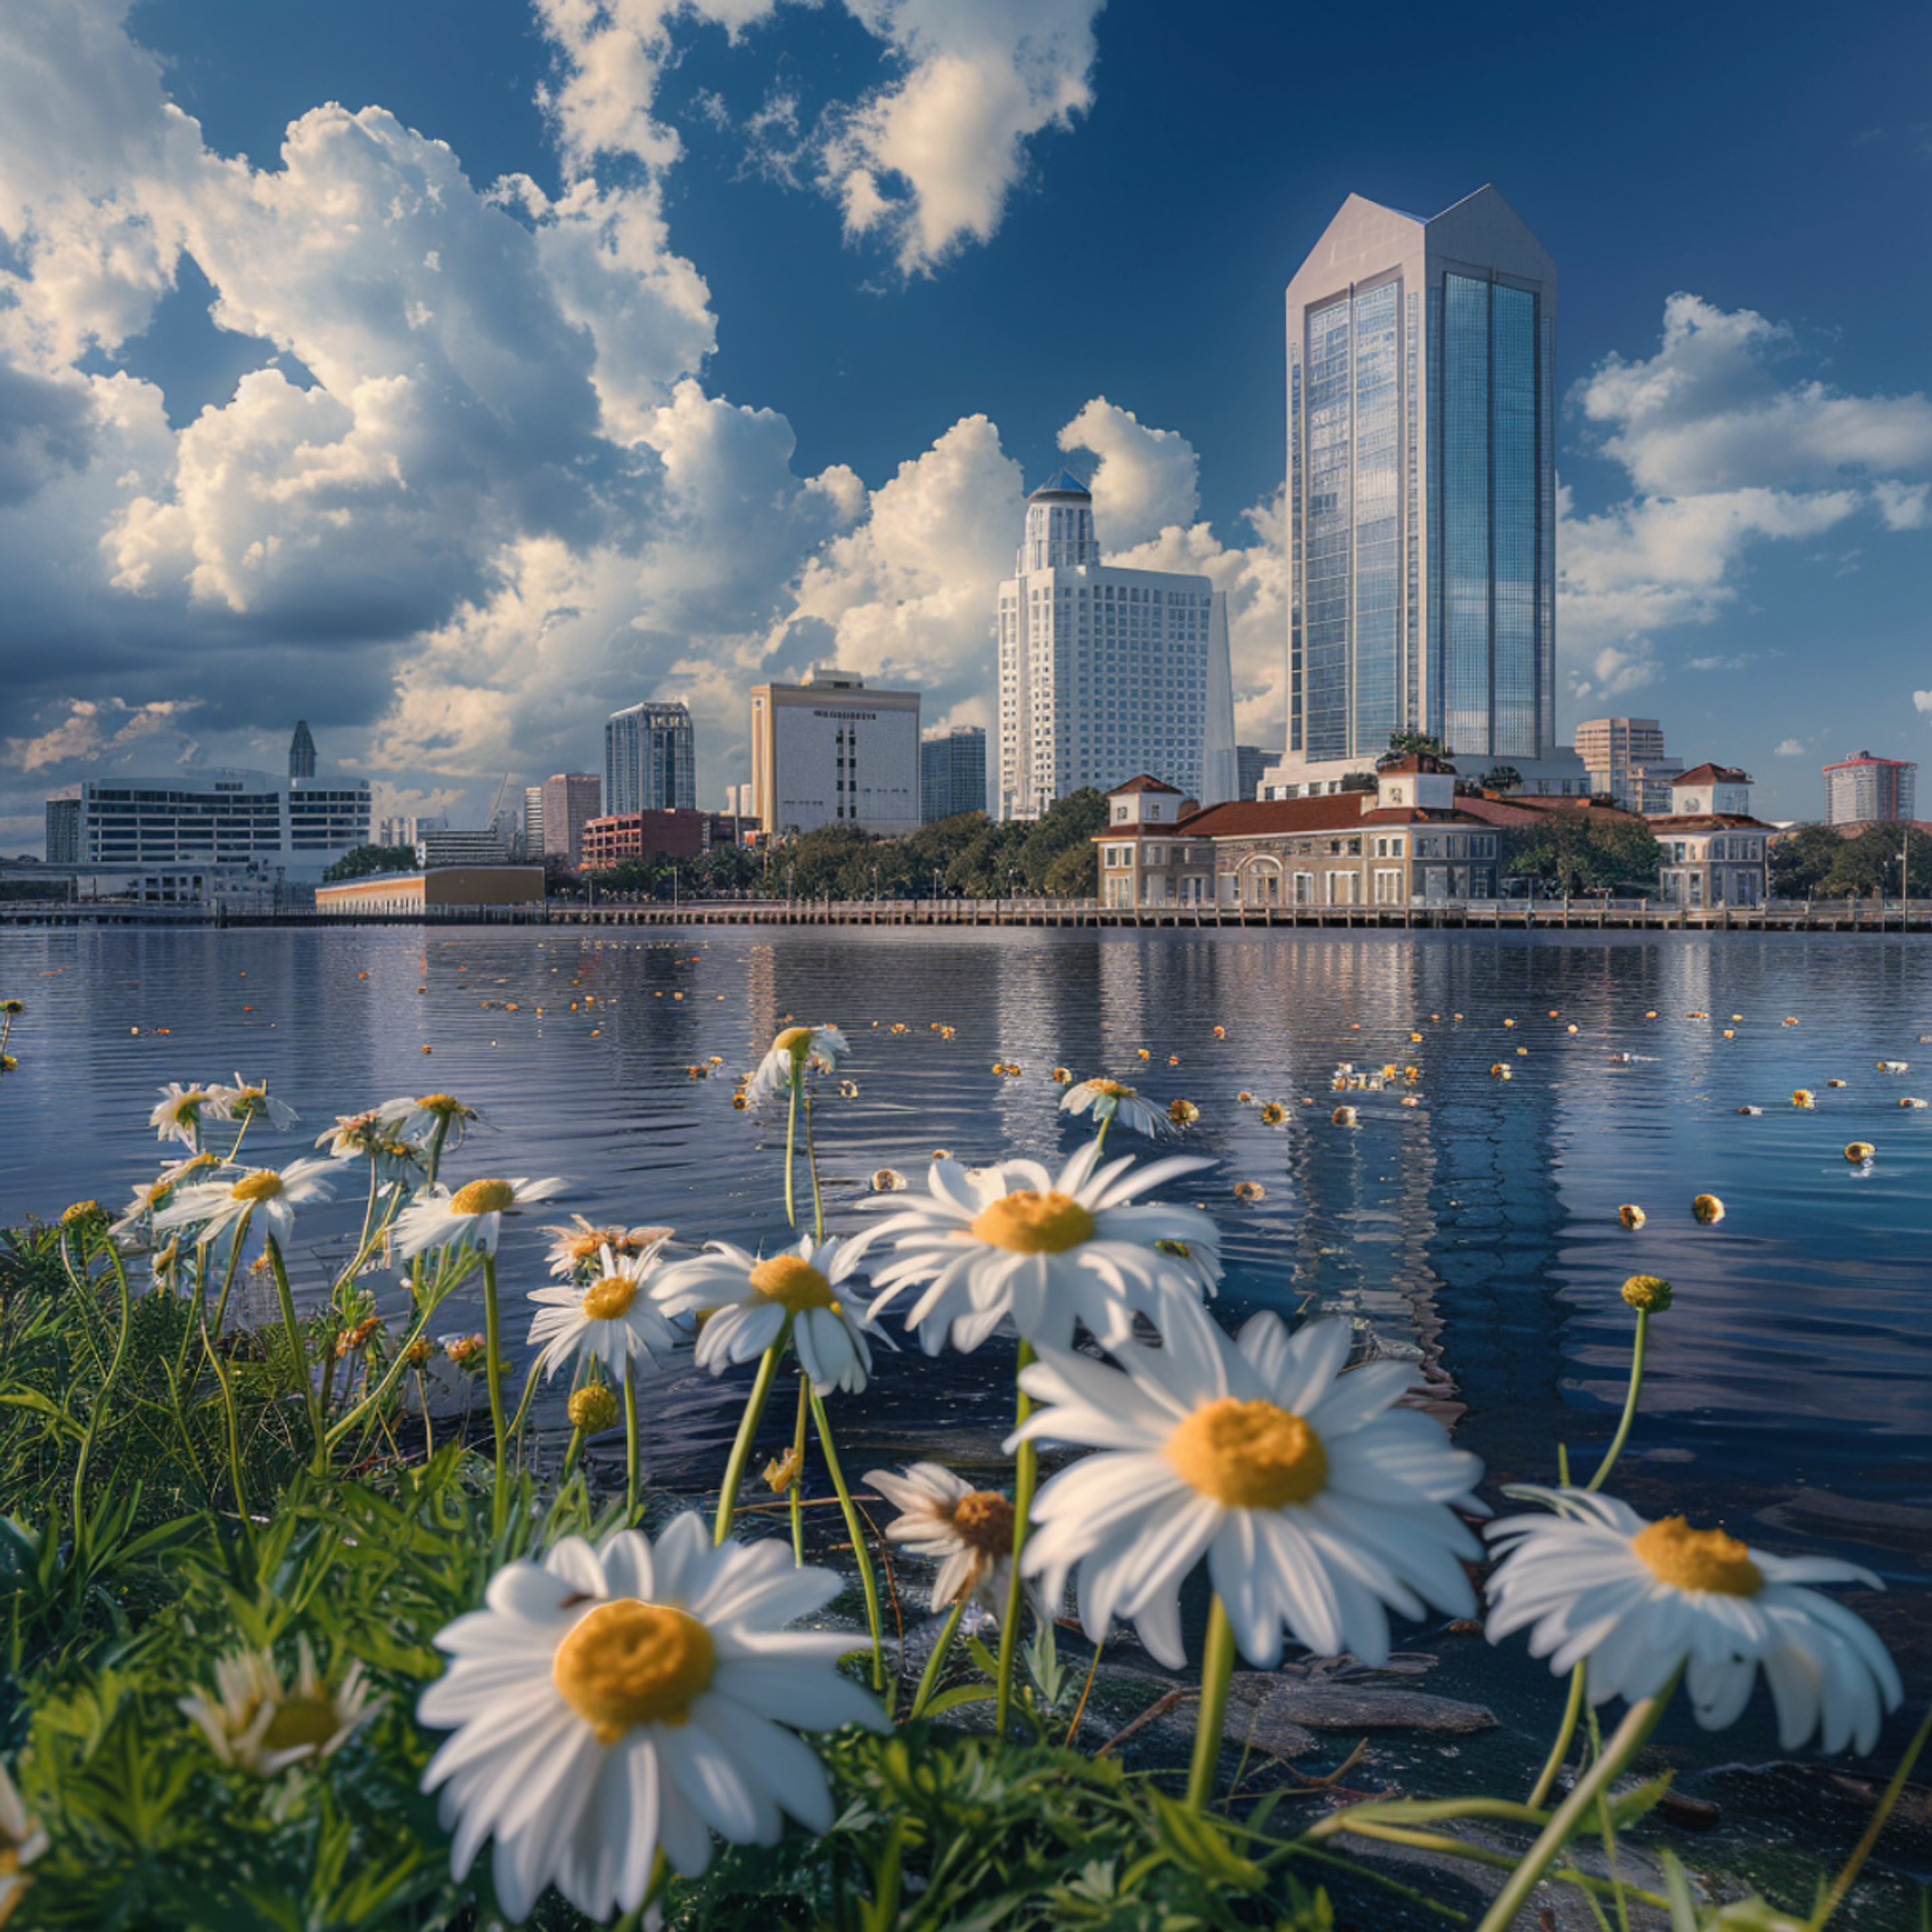 Scenic view of downtown Jacksonville, Florida, across the St. Johns River with vibrant daisies in the foreground and the city's modern skyscrapers under a dynamic cloud-filled sky, reflecting a cityscape in harmony with its natural riverfront setting.